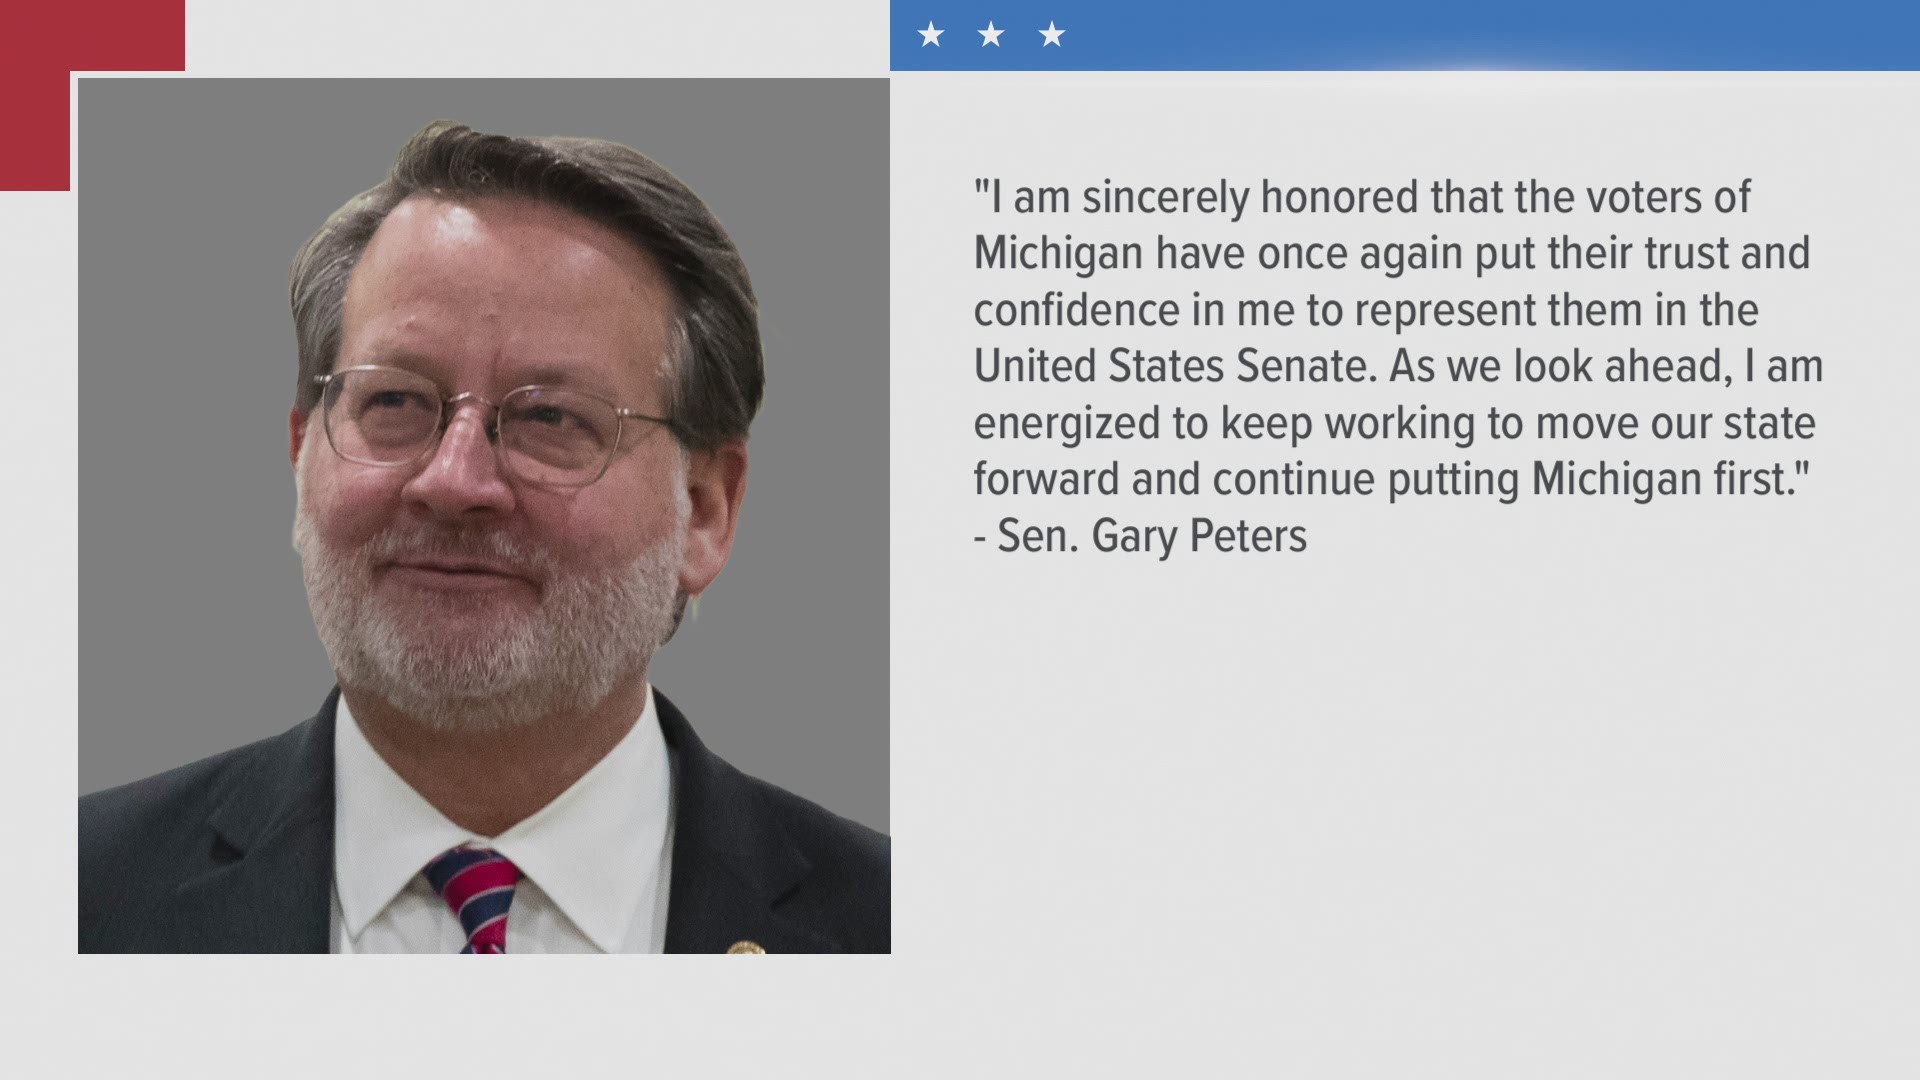 Peters, 61, had served one term in the Senate. His victory means Michigan will continue to have two Democrat senators.